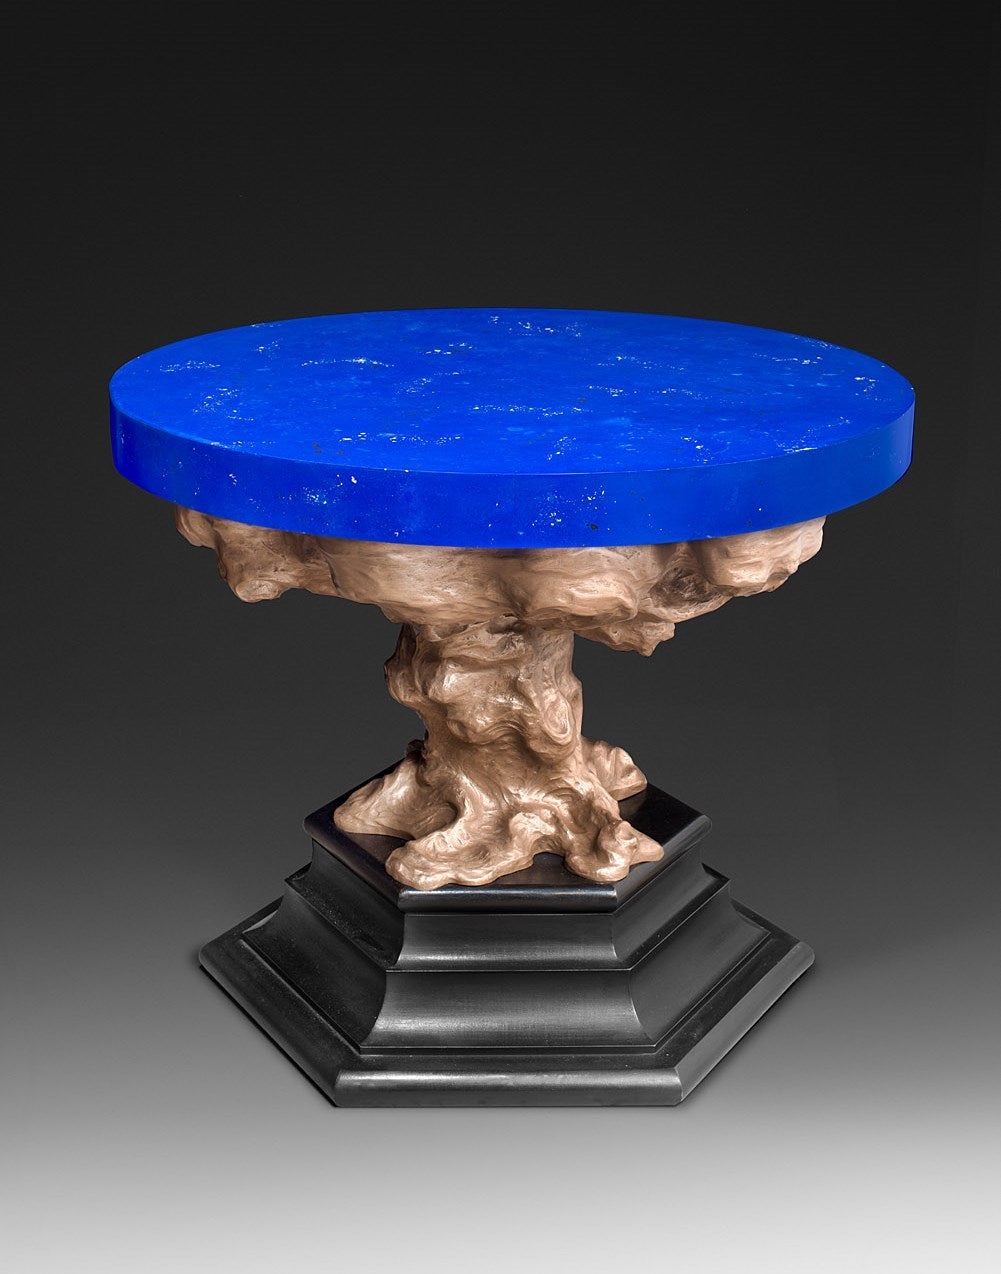 Oriel Harwood 2013, Cloud Table, Mixed Media, Resin, Scagliola, Wood
Top is 95 cm diameter, 80 cm height 
Signed
Unique piece